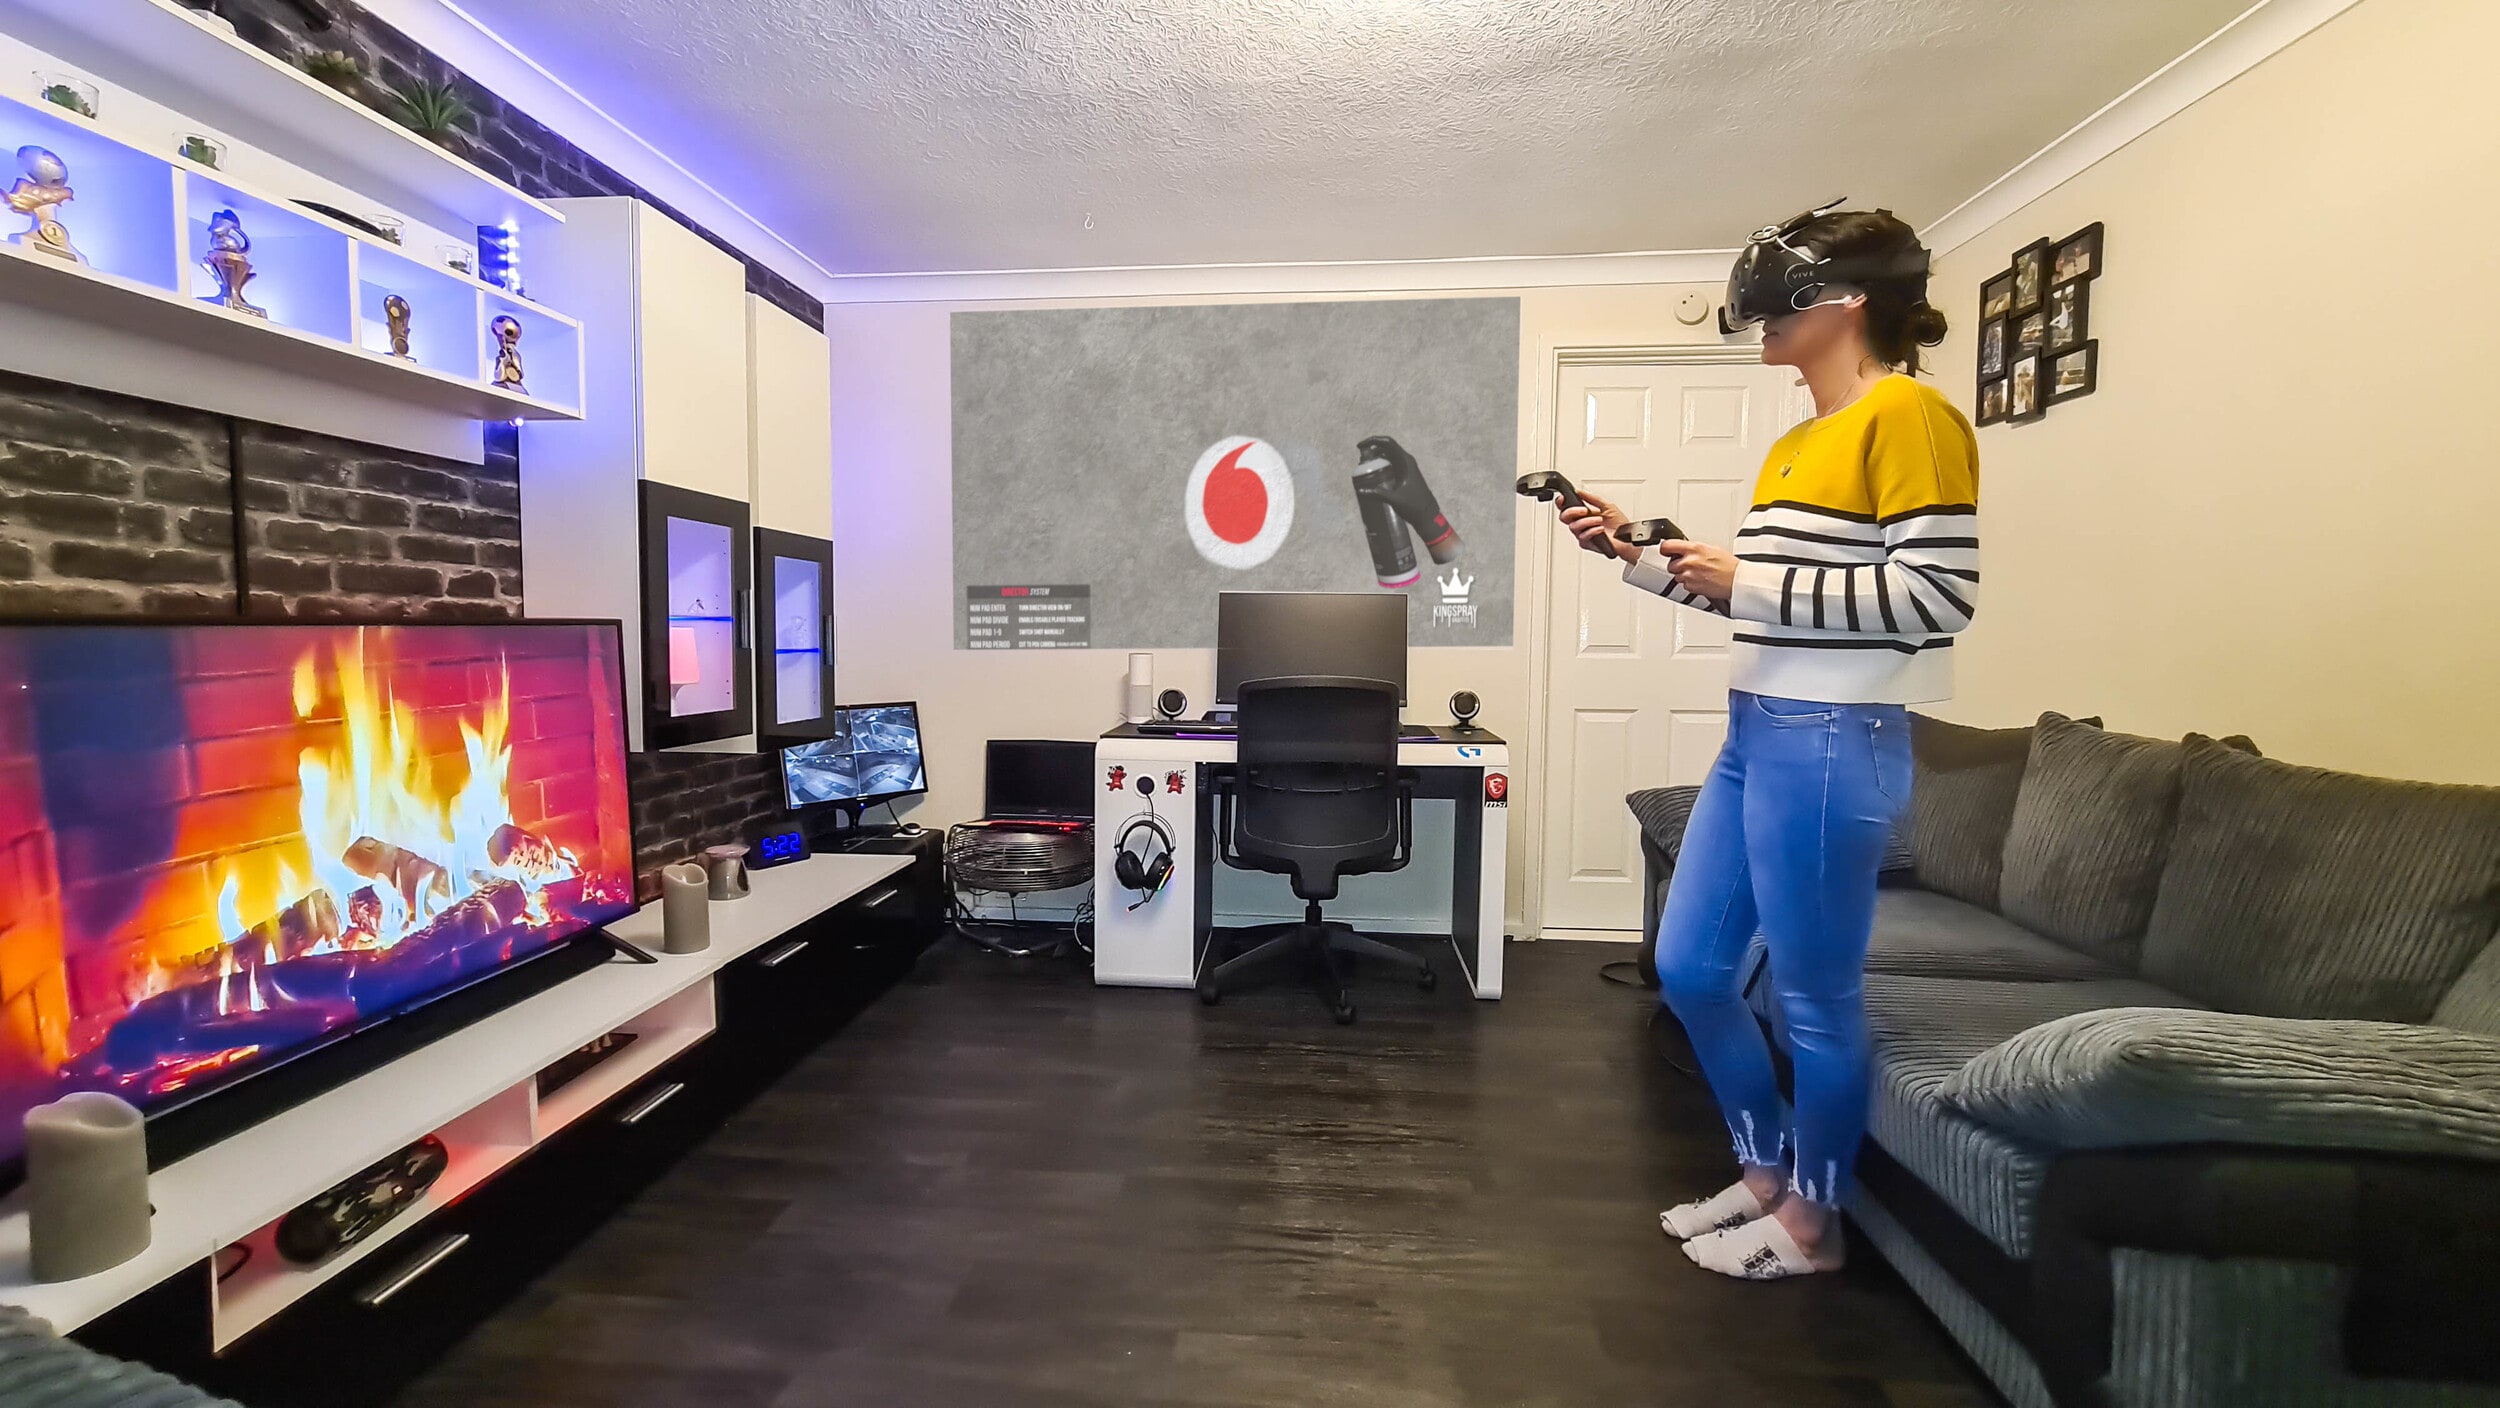 A woman using VR headset in the living room